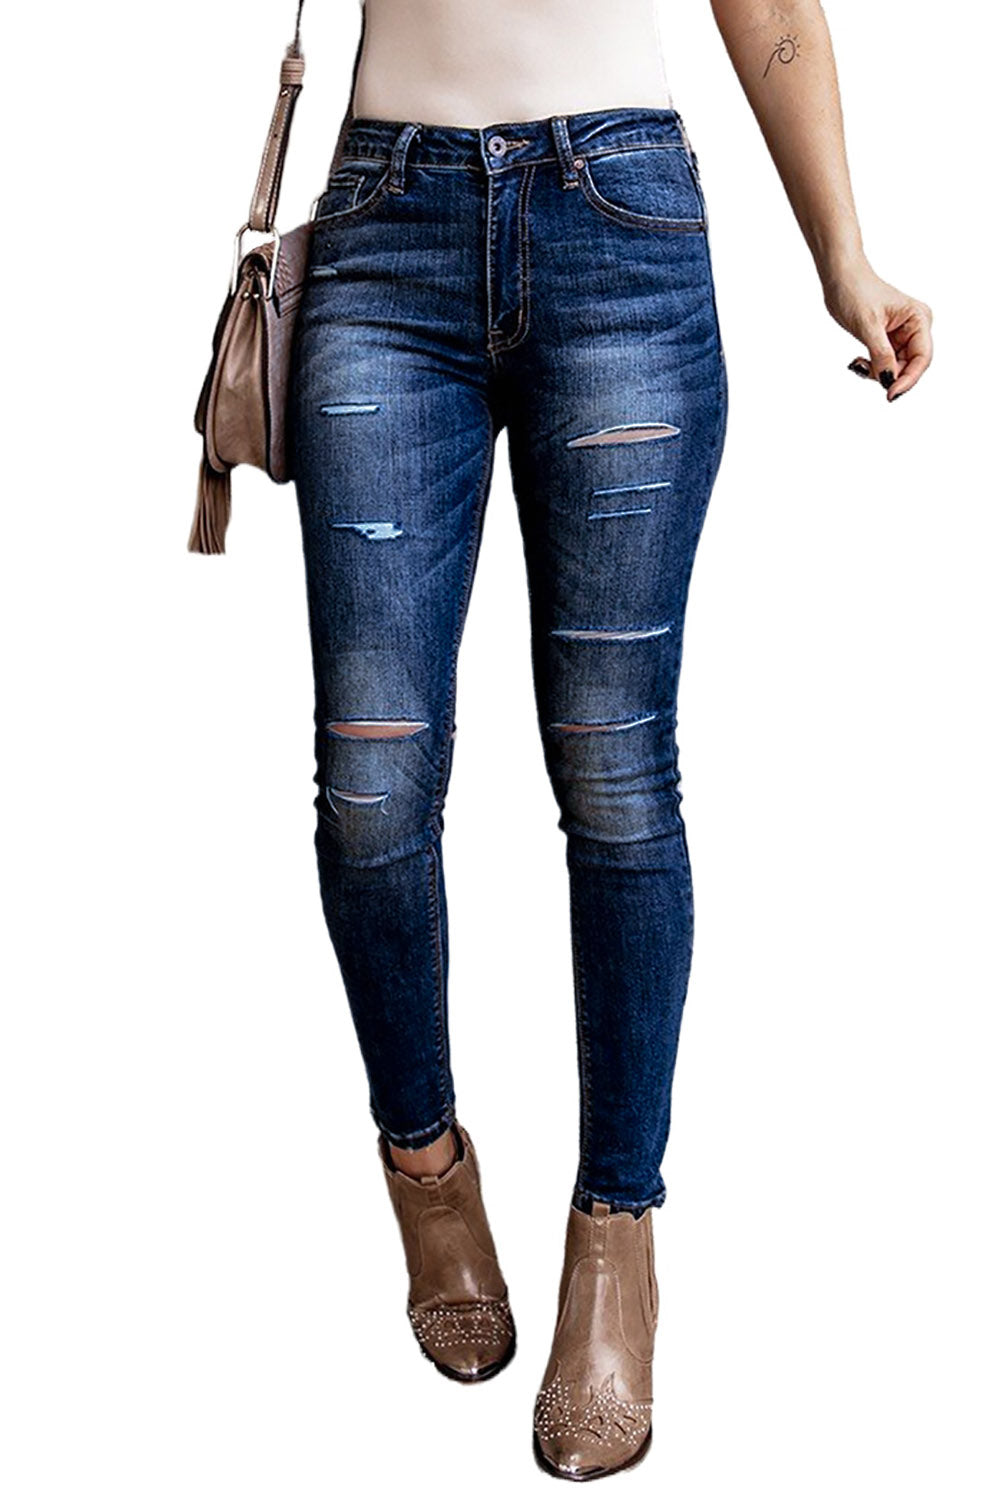 Blue Blue Ripped High Rise Ankle Length Skinny Jeans Jeans JT's Designer Fashion